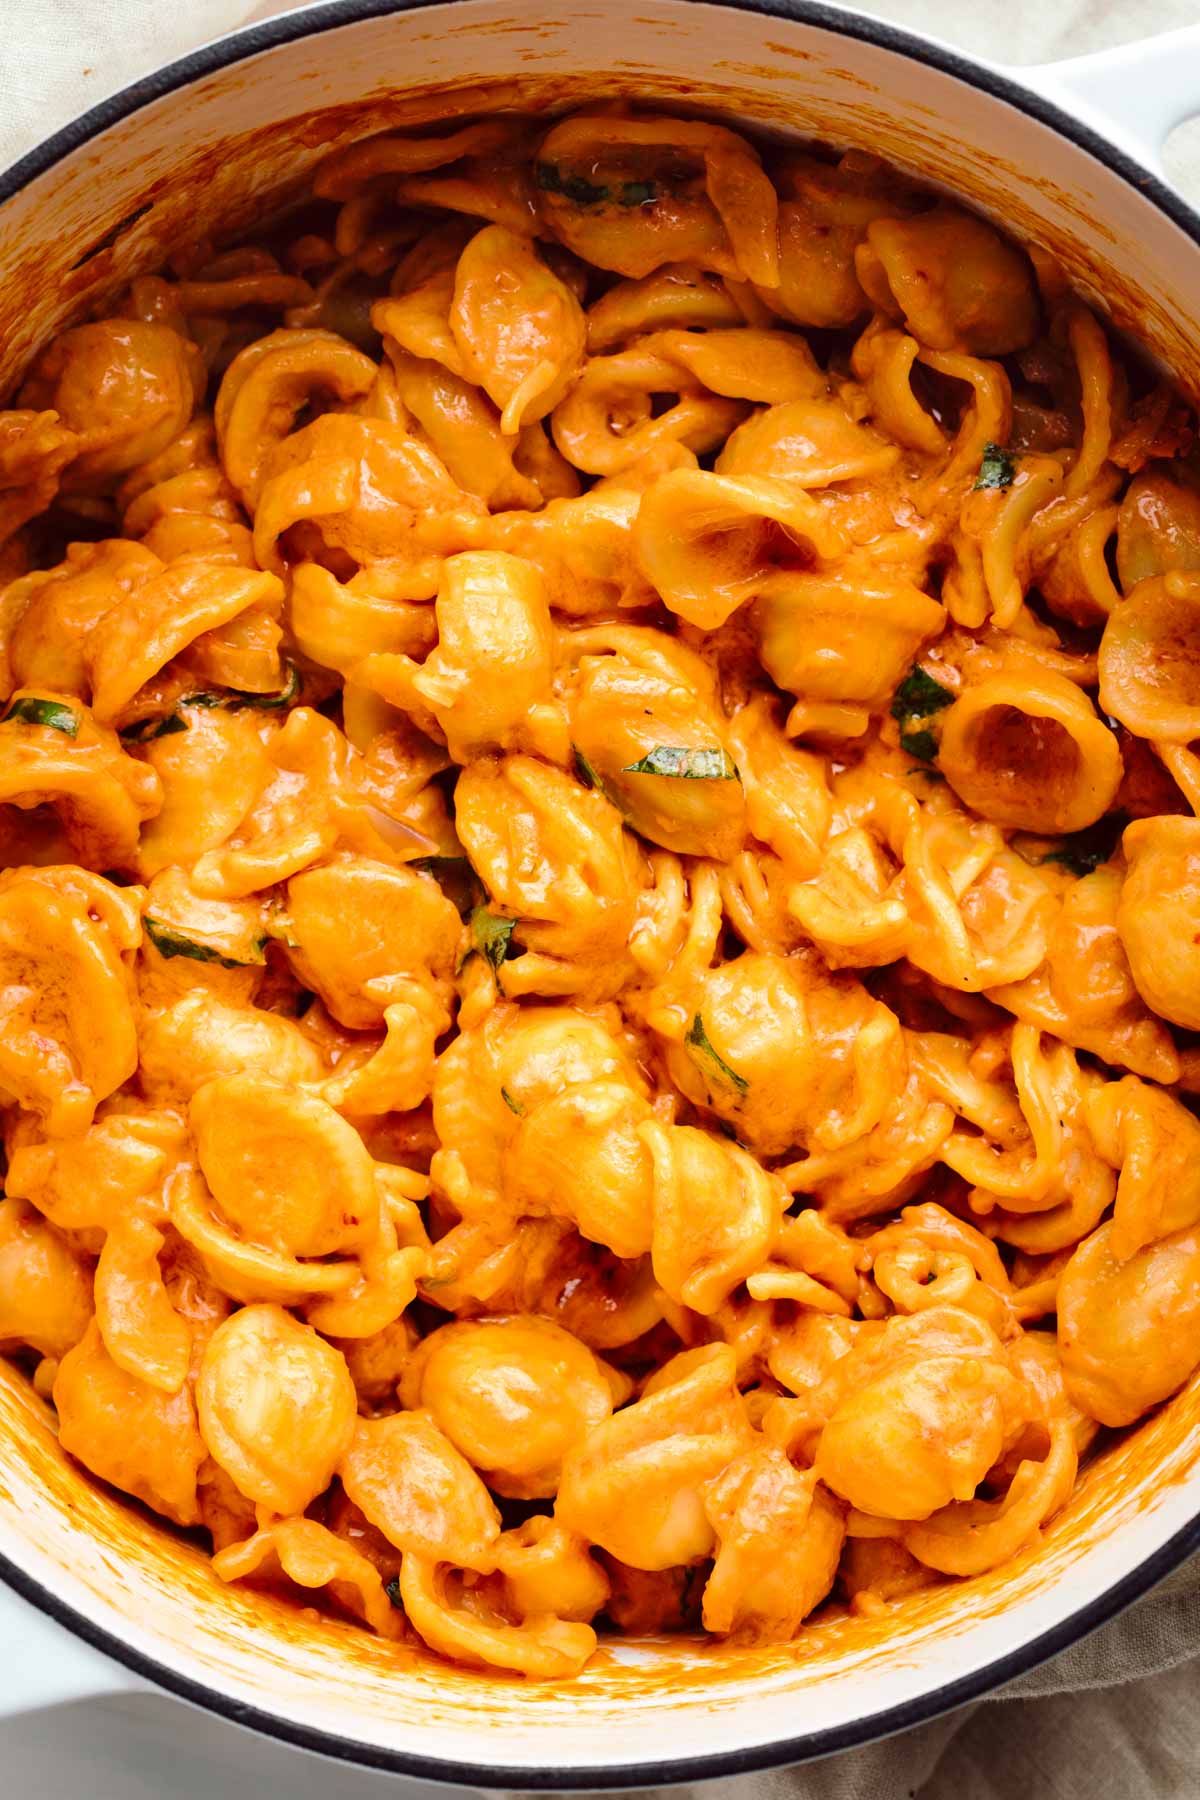 A close up of orange colored shell pasta in a white pot with some mixed chopped basil visible through the pasta.